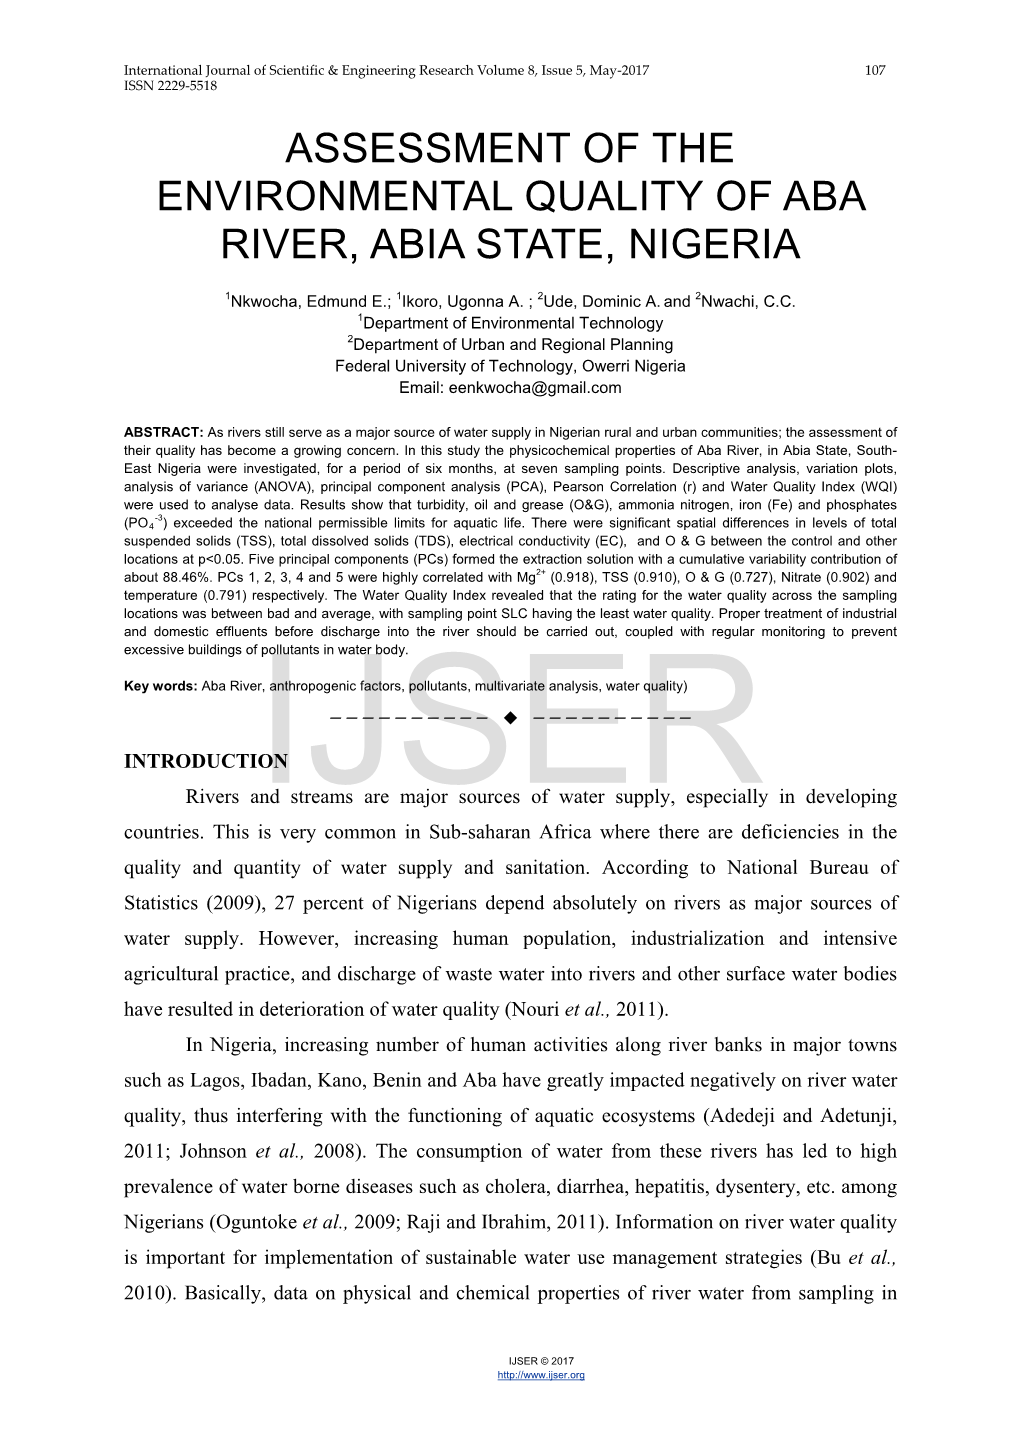 Assessment of the Environmental Quality of Aba River, Abia State, Nigeria